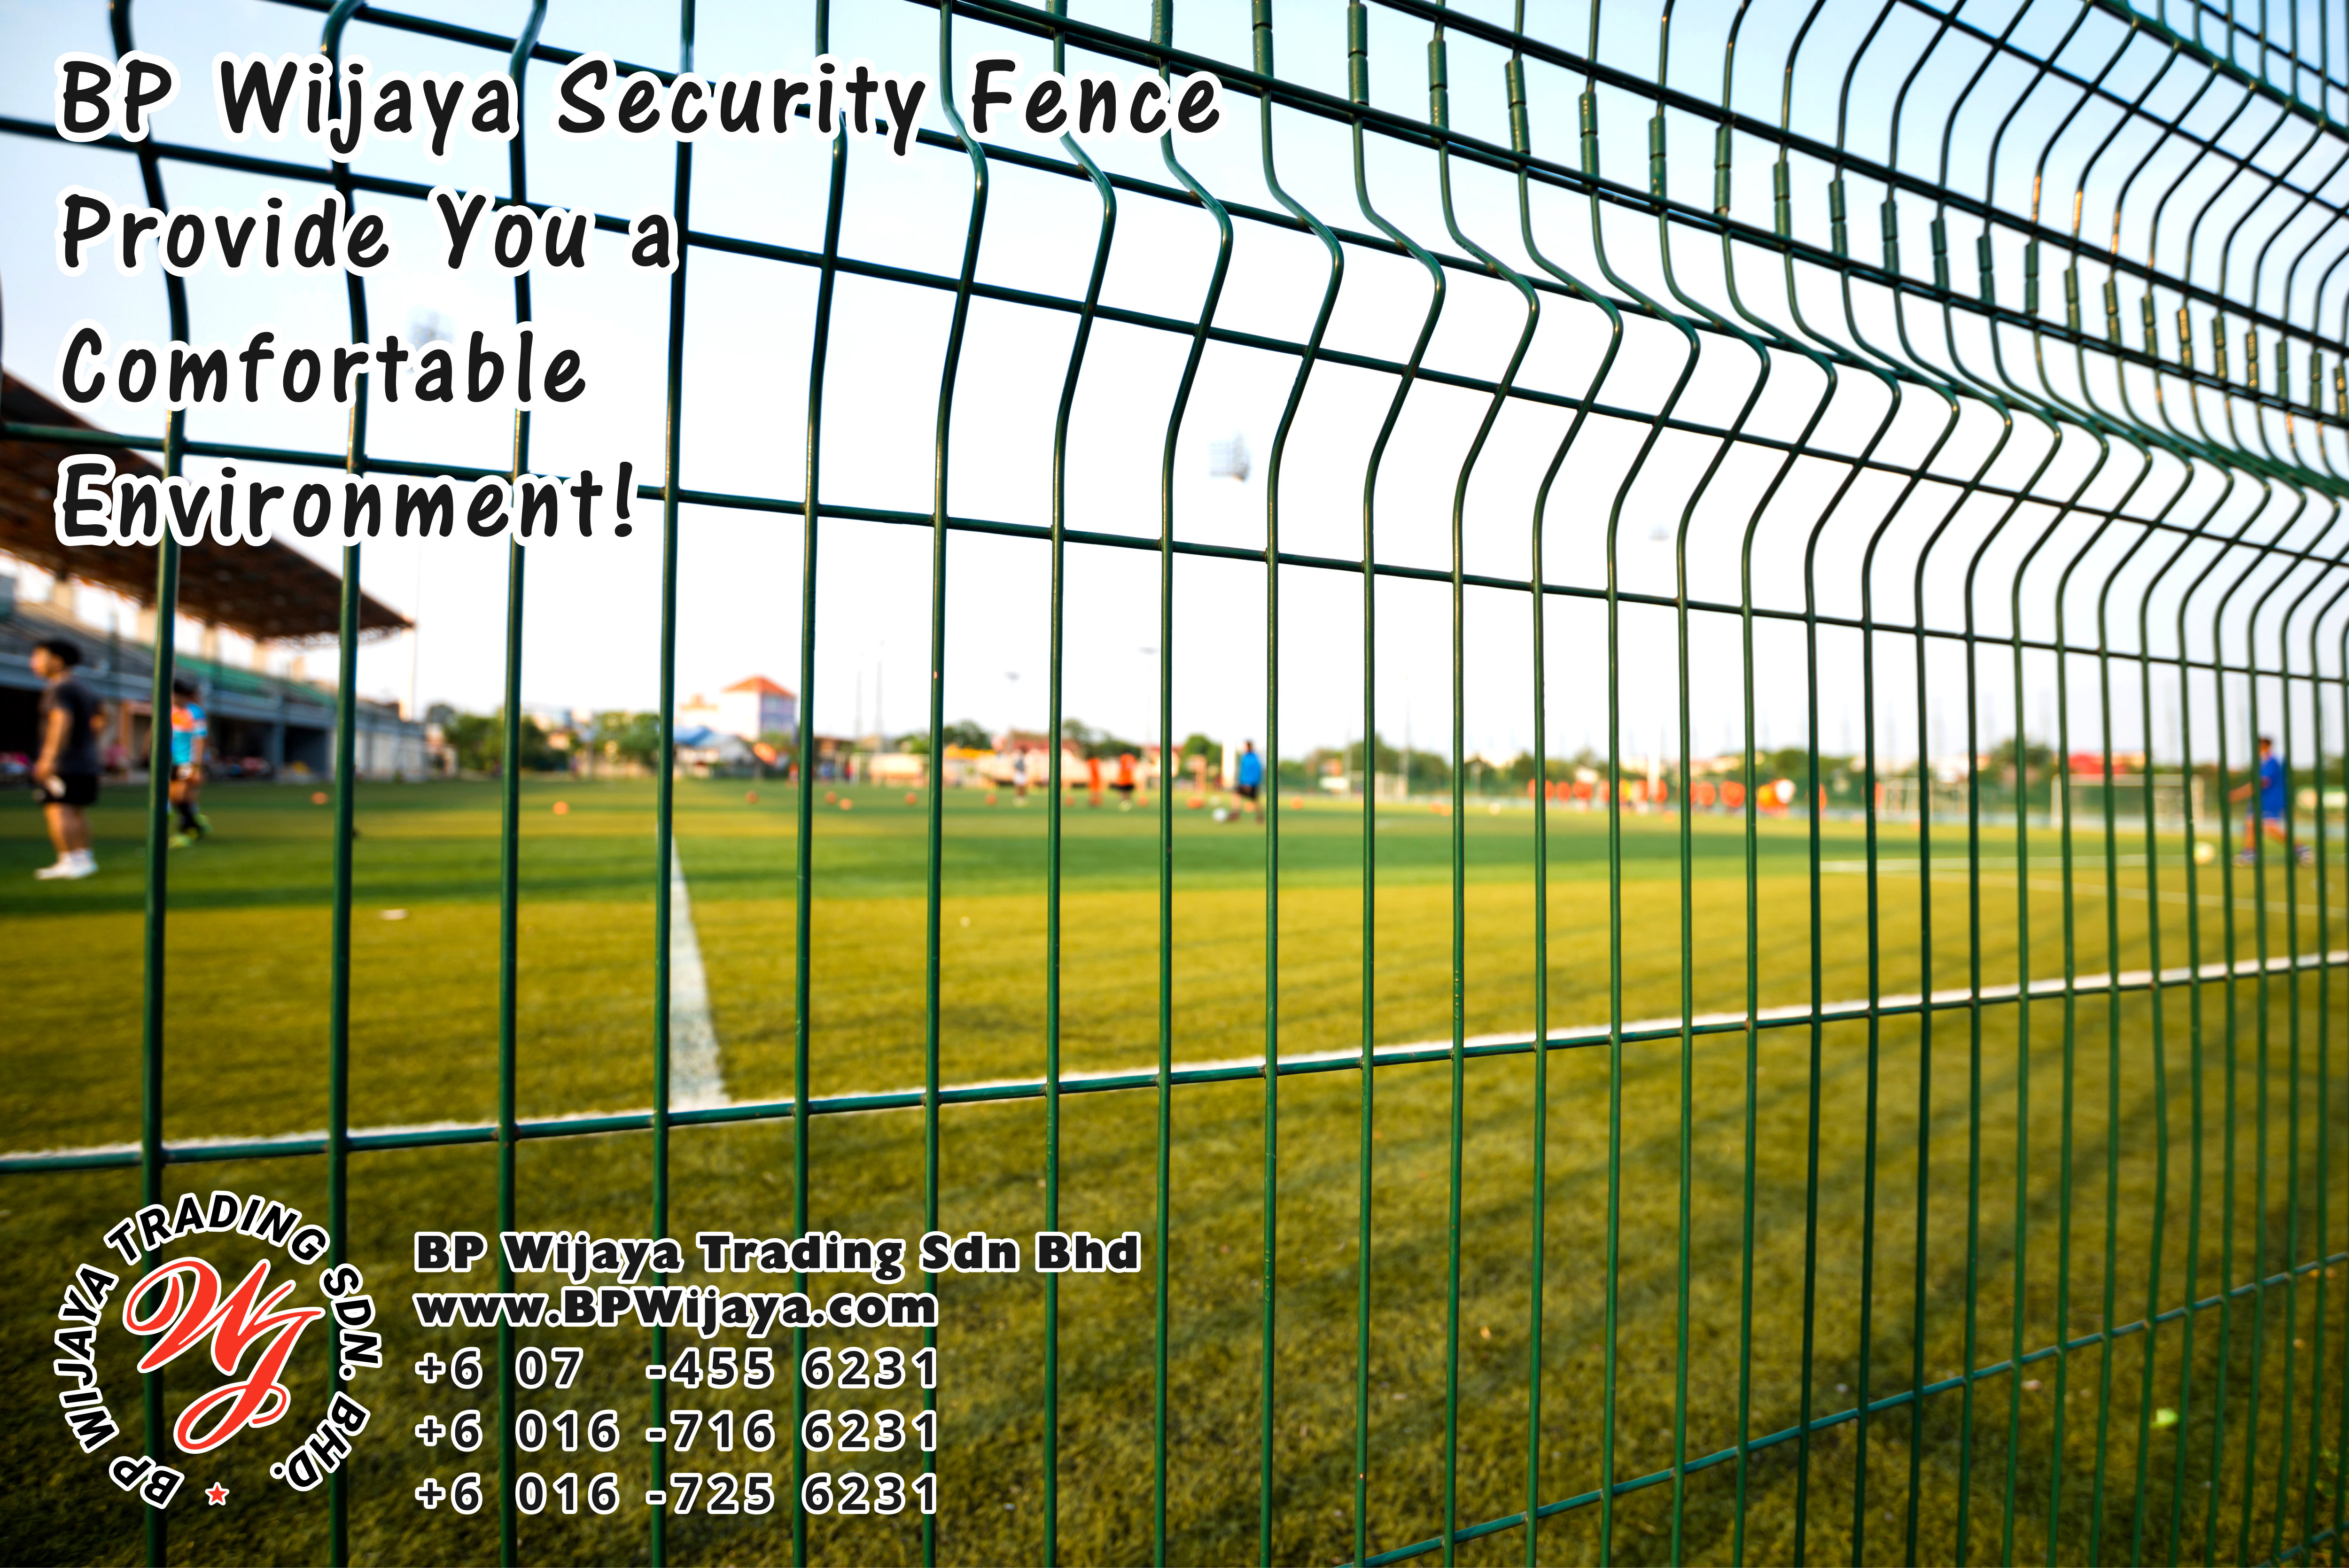 BP Wijaya Trading Sdn Bhd Malaysia Pahang Kuantan Temerloh Mentakab Manufacturer of Safety Fences Building Materials for Housing Construction Site Industial Security Fencing Factory A01-84